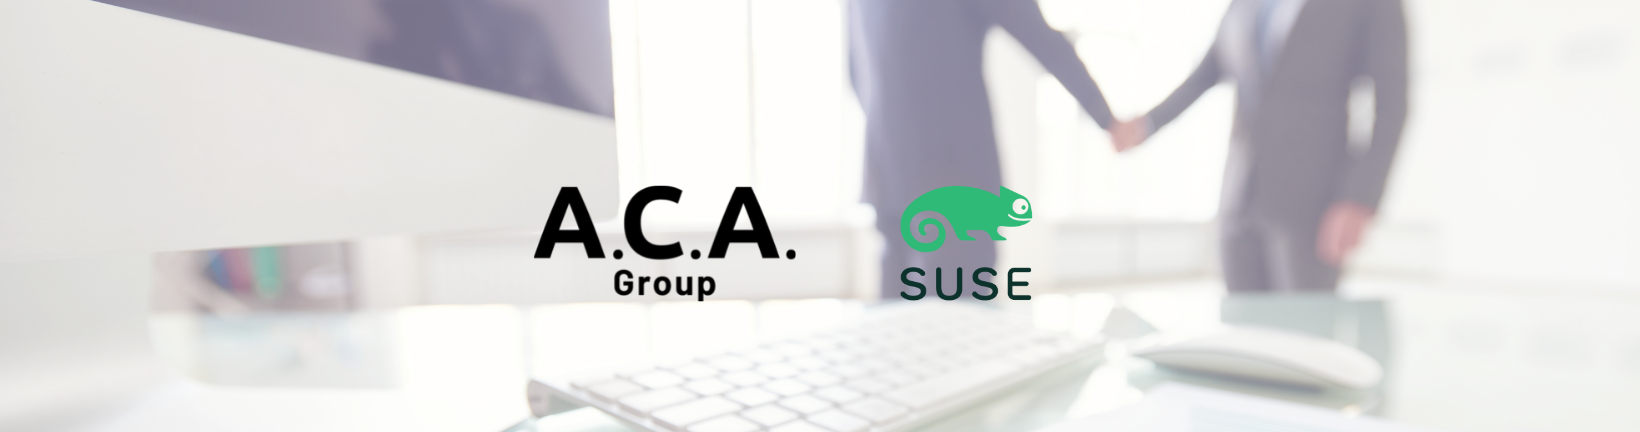 ACA Group and SUSE partnership